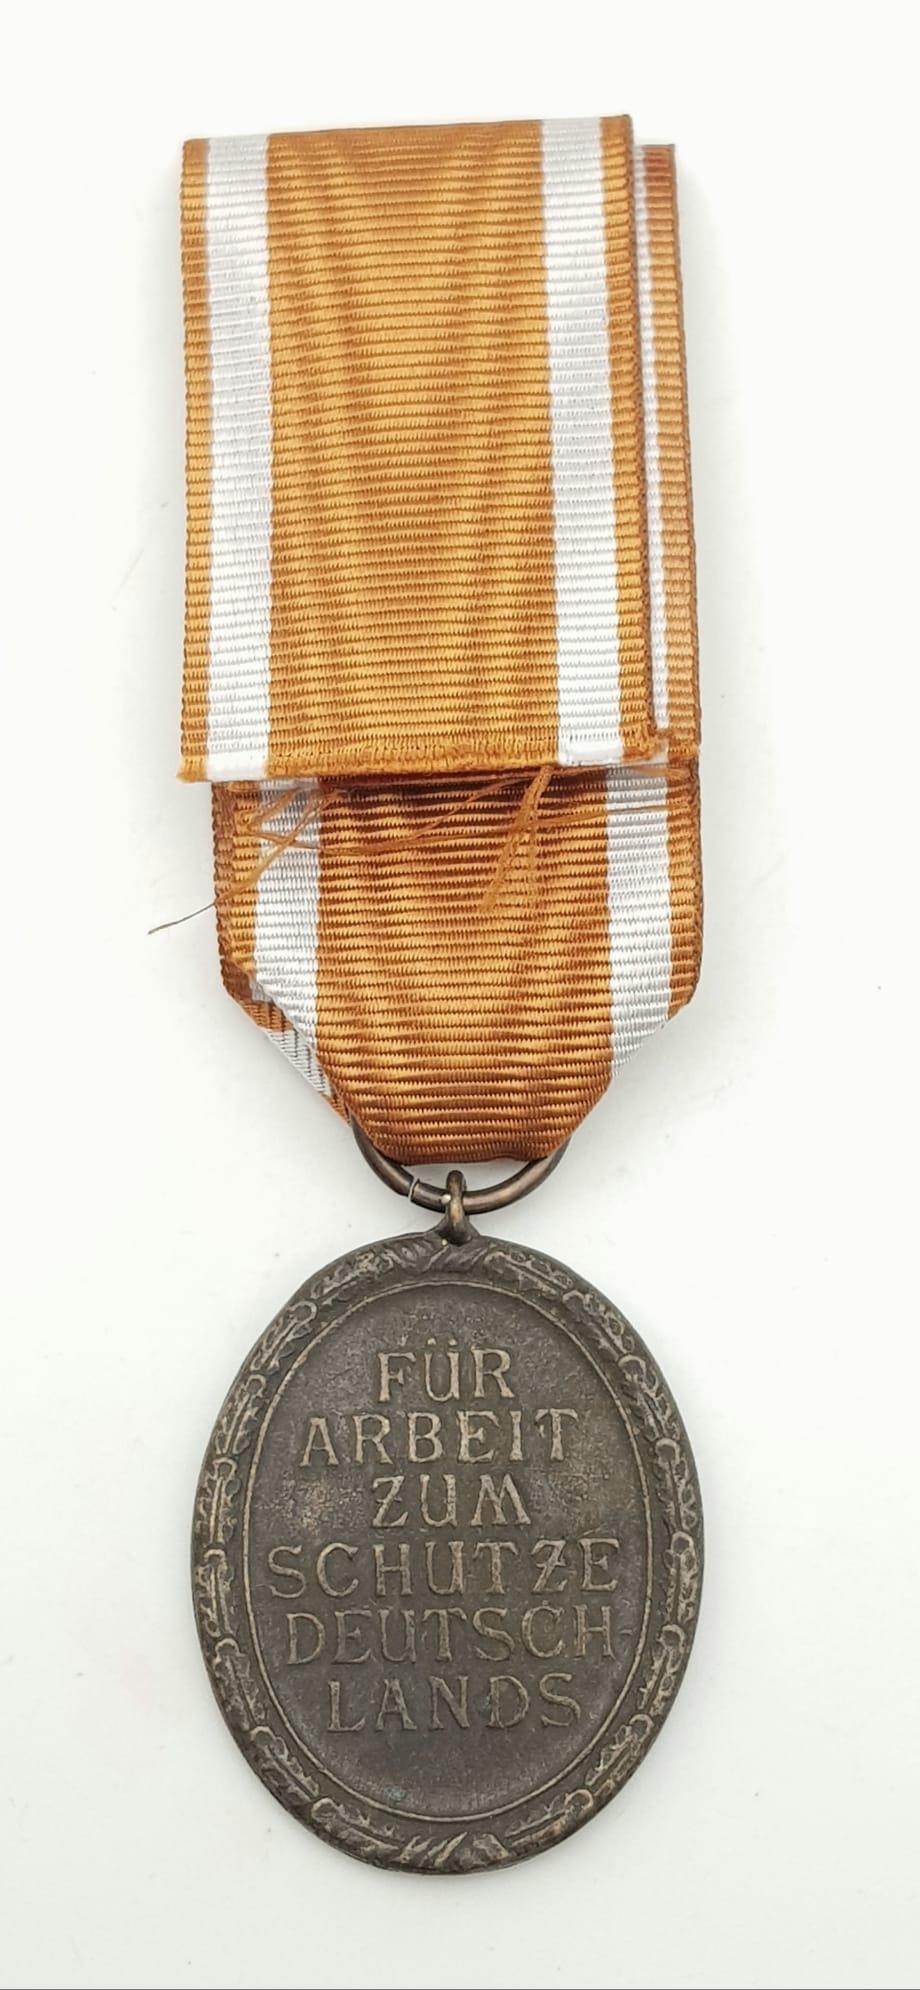 WW2 German West Wall Medal Awarded to those who had built or served on the Siegfried Line. - Image 2 of 4